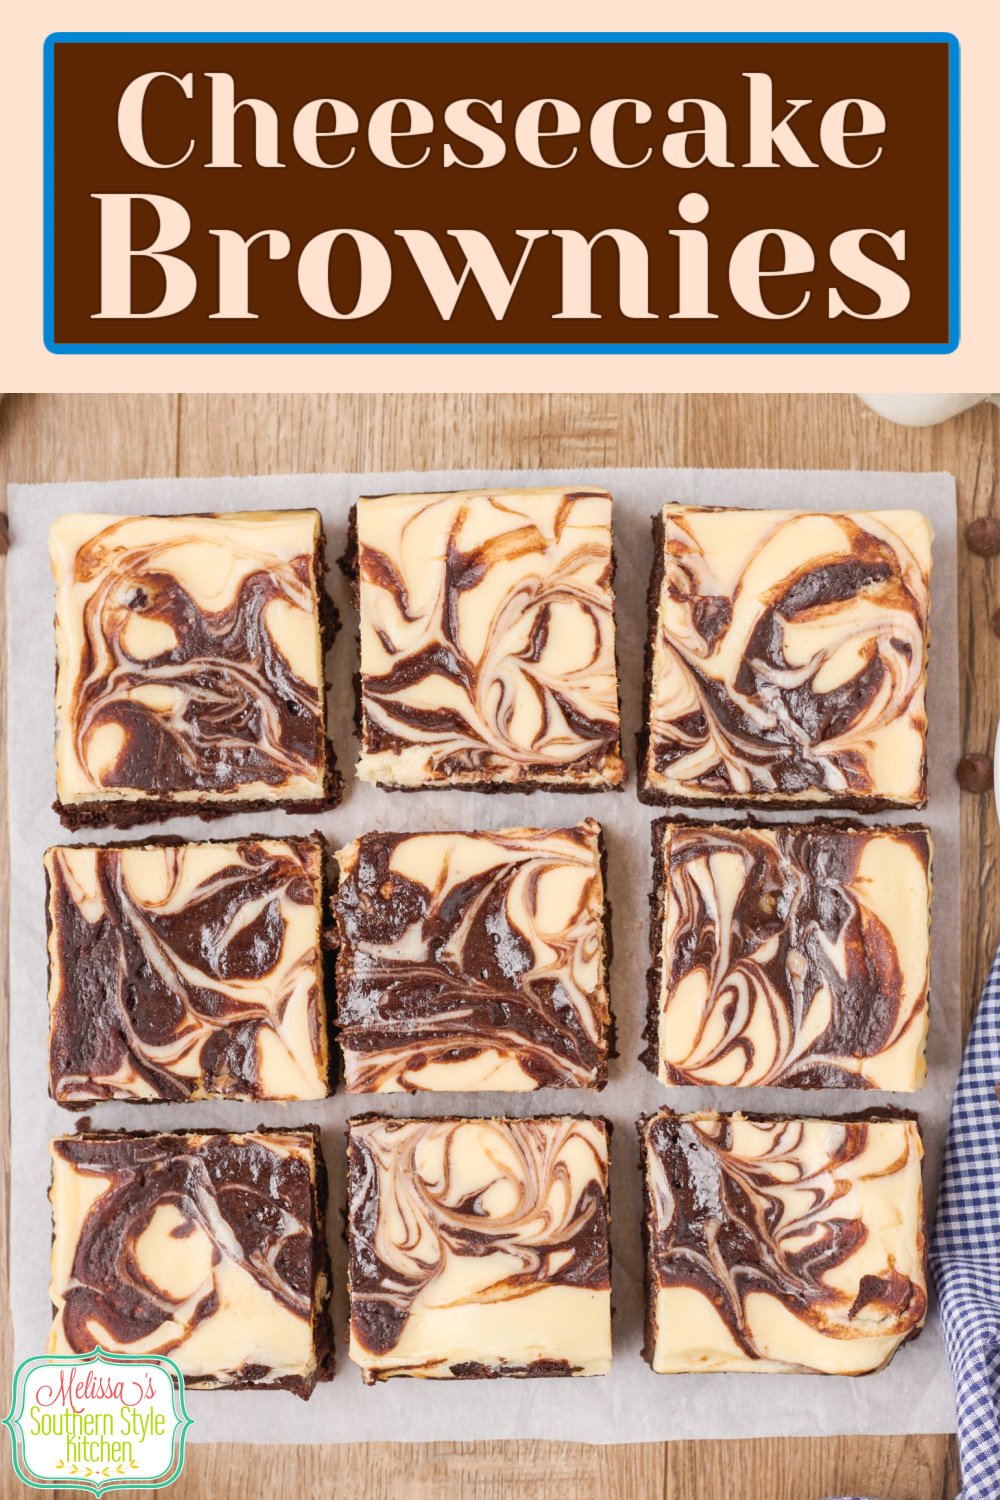 These Cheesecake Brownies from backyard barbecues, to casual parties and holiday gatherings #brownies #cheesecakebrownies #brownierecipes #cheesecake #browniecheesecake #cheesecakebrownies #chocolatedesserts via @melissasssk